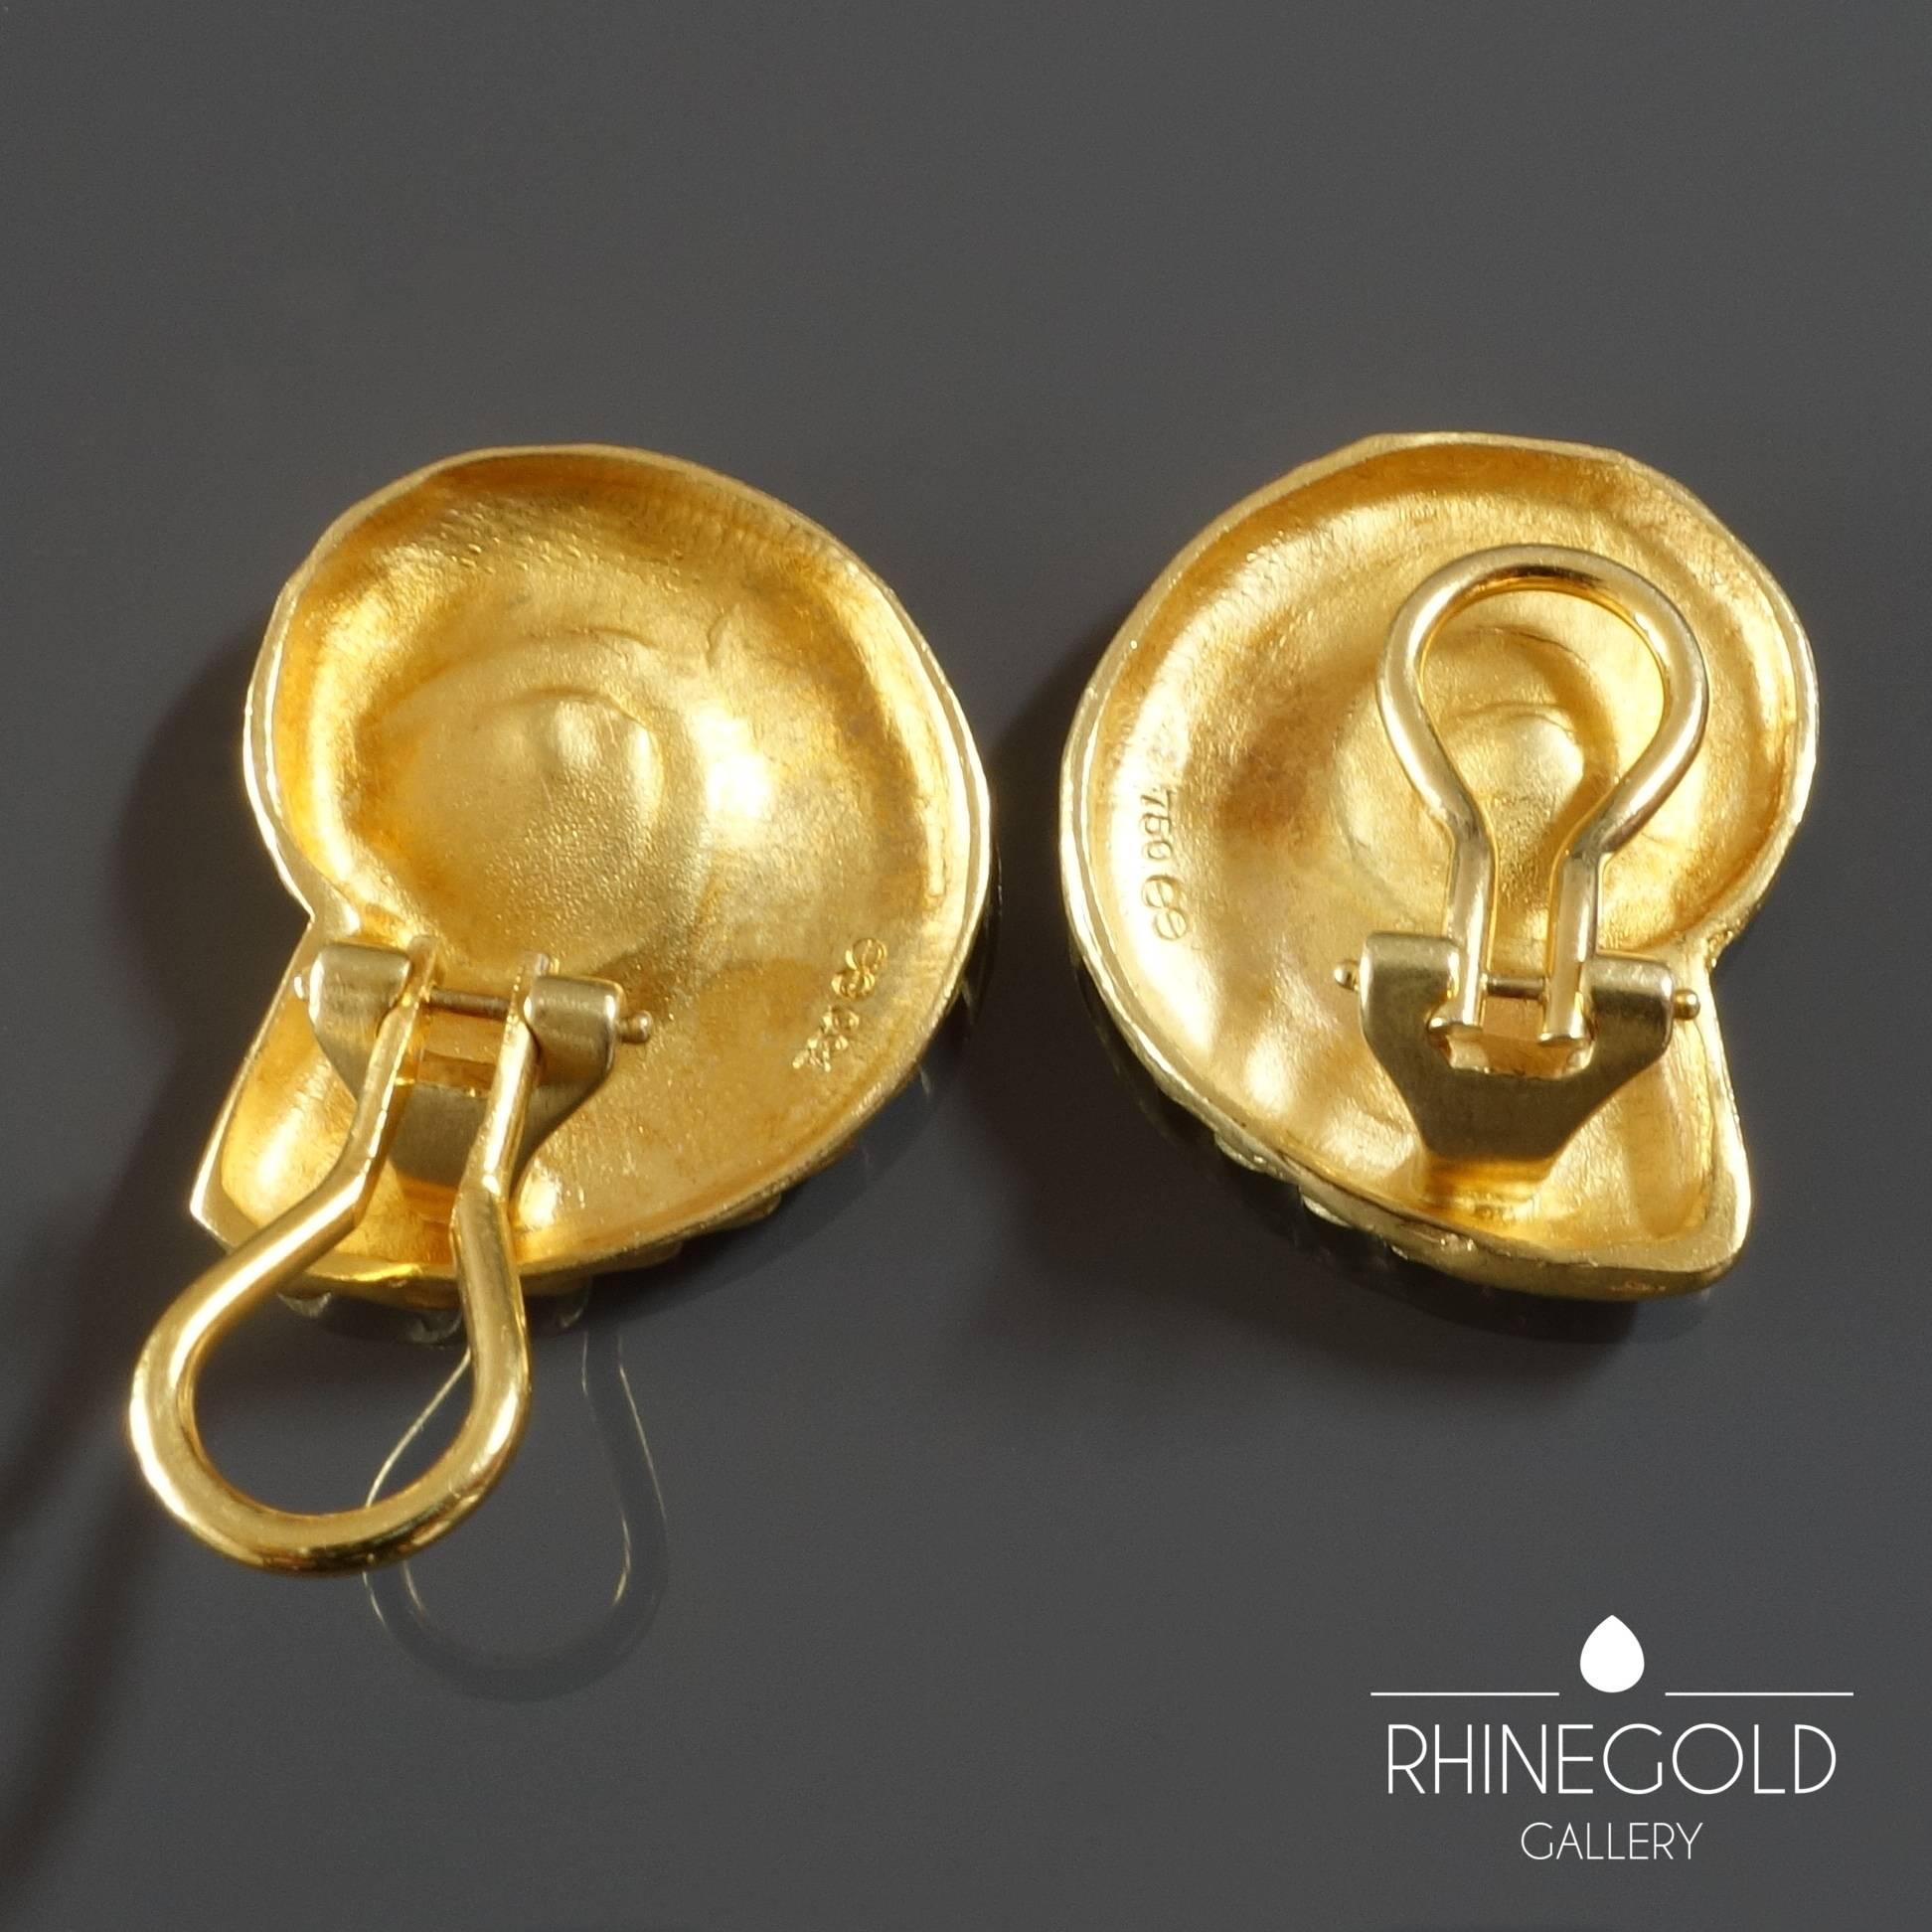 Ehinger-Schwarz A Pair of Modernist Gold Ammonite Shell Clip-on Earrings
18k yellow gold
Size 2.2 cm by 1.8 cm (approx. 7/8” by 11/16”)
Weight approx. 11.9 grams
Marks: maker’s mark, gold content mark ‘750‘ for 18k gold
Germany, 1970s -1980s

Models